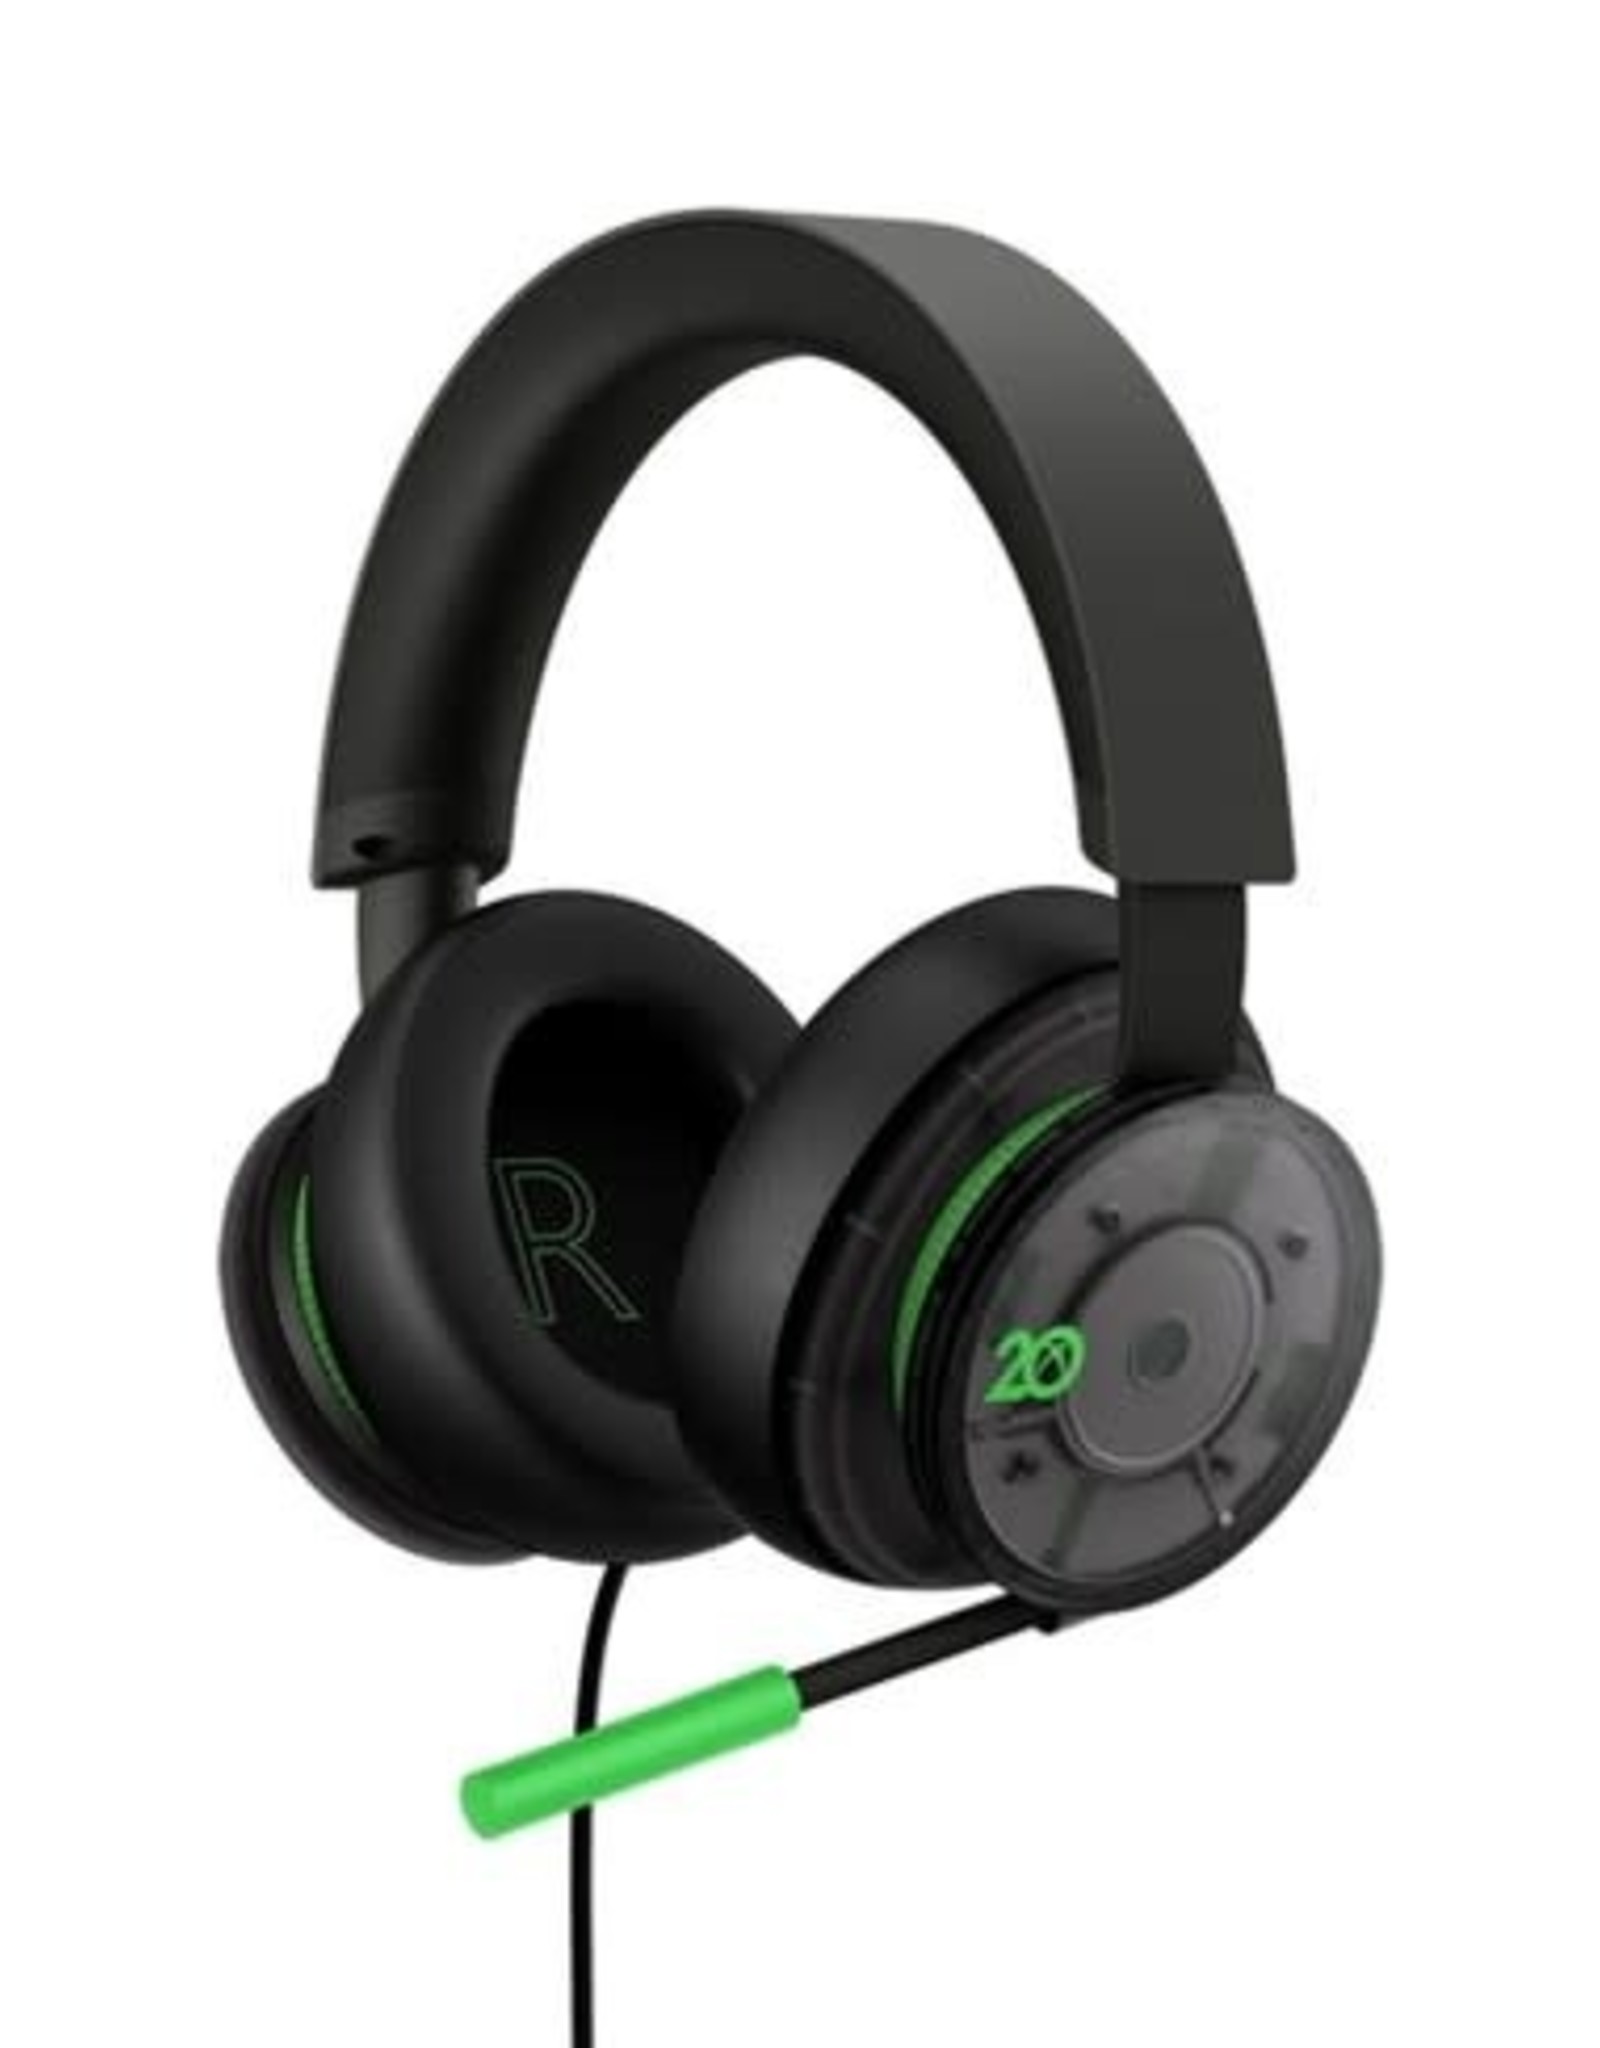 Xbox Stereo Headset – 20th Anniversary Special Edition for Xbox Series X|S, Xbox One, and Windows